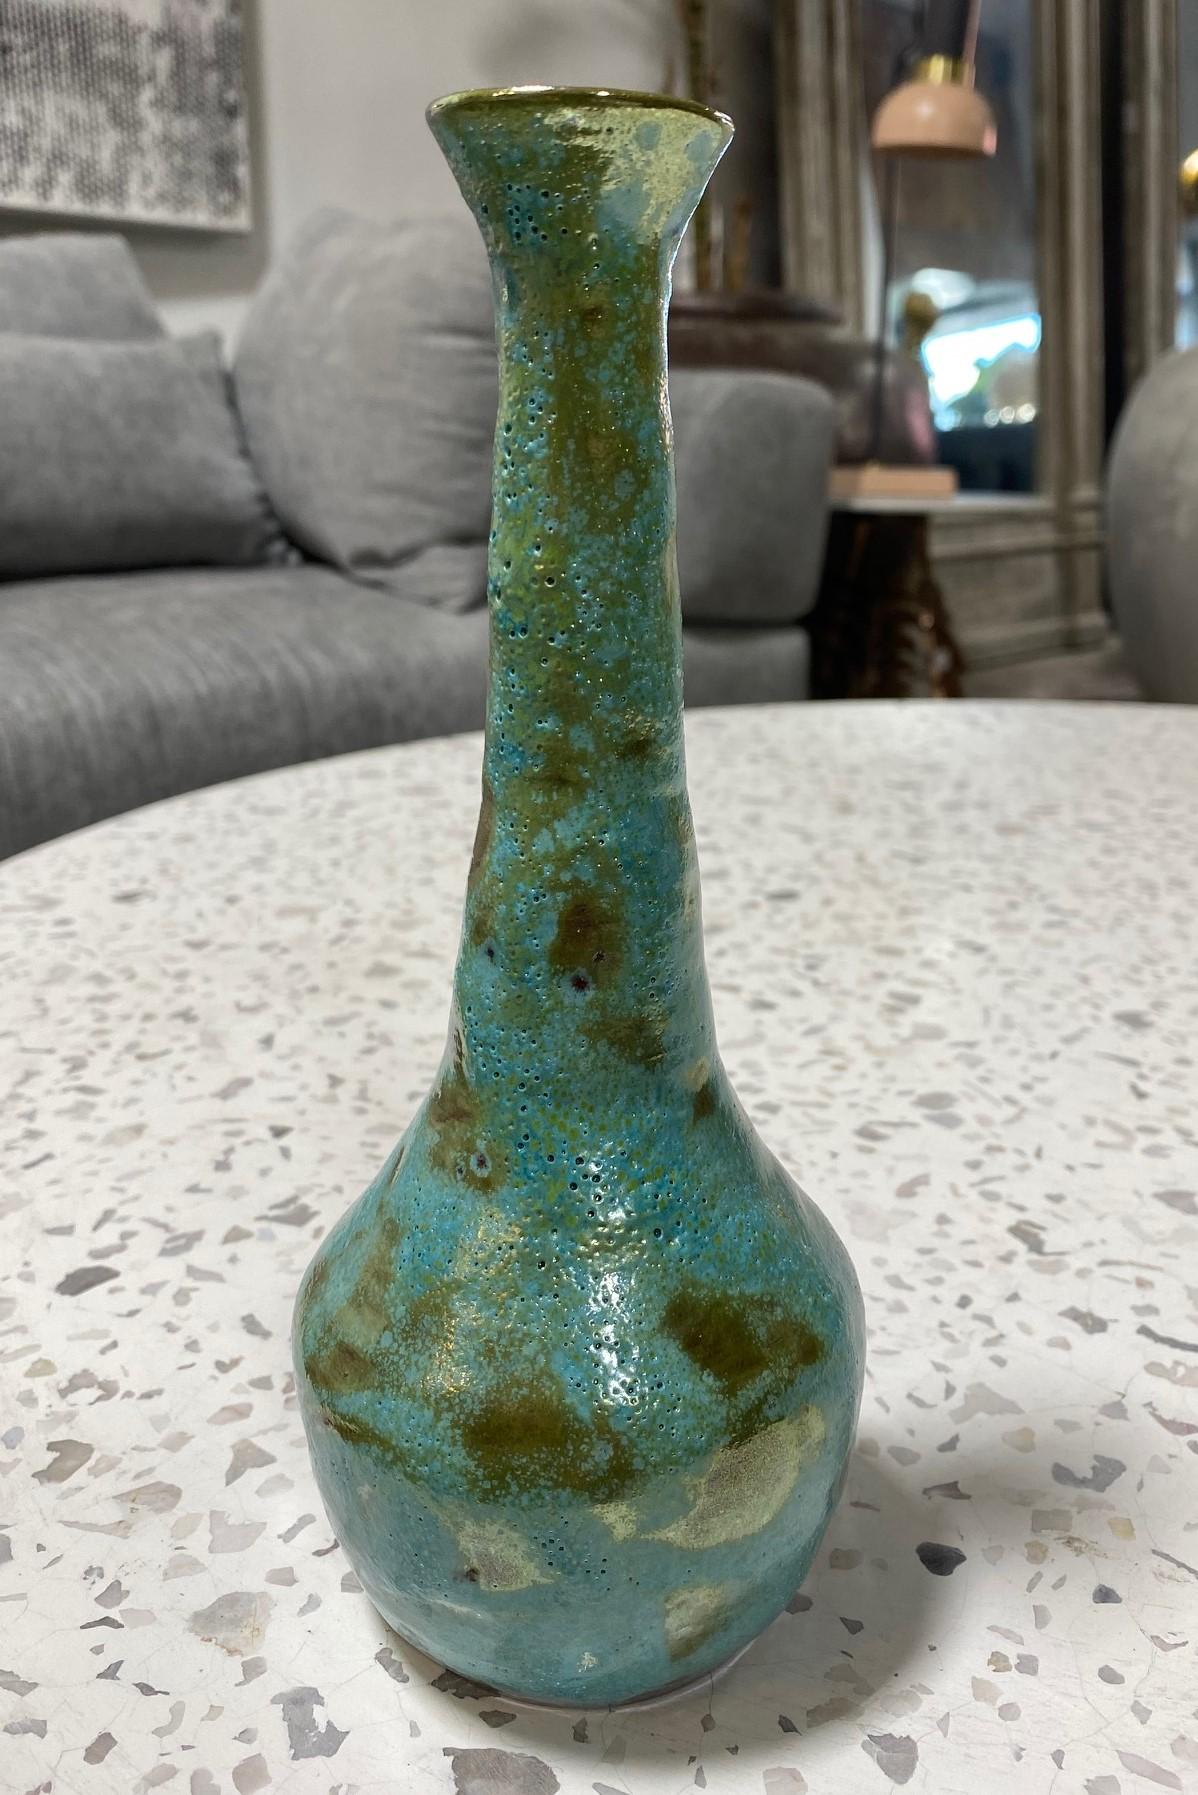 A wonderful gem of a piece by famed American/California ceramicist Beatrice Wood featuring her highly coveted, gorgeously radiant turquoise luster glaze. A beautiful design with a delicate long neck rising from a circular base. Classic and timeless.